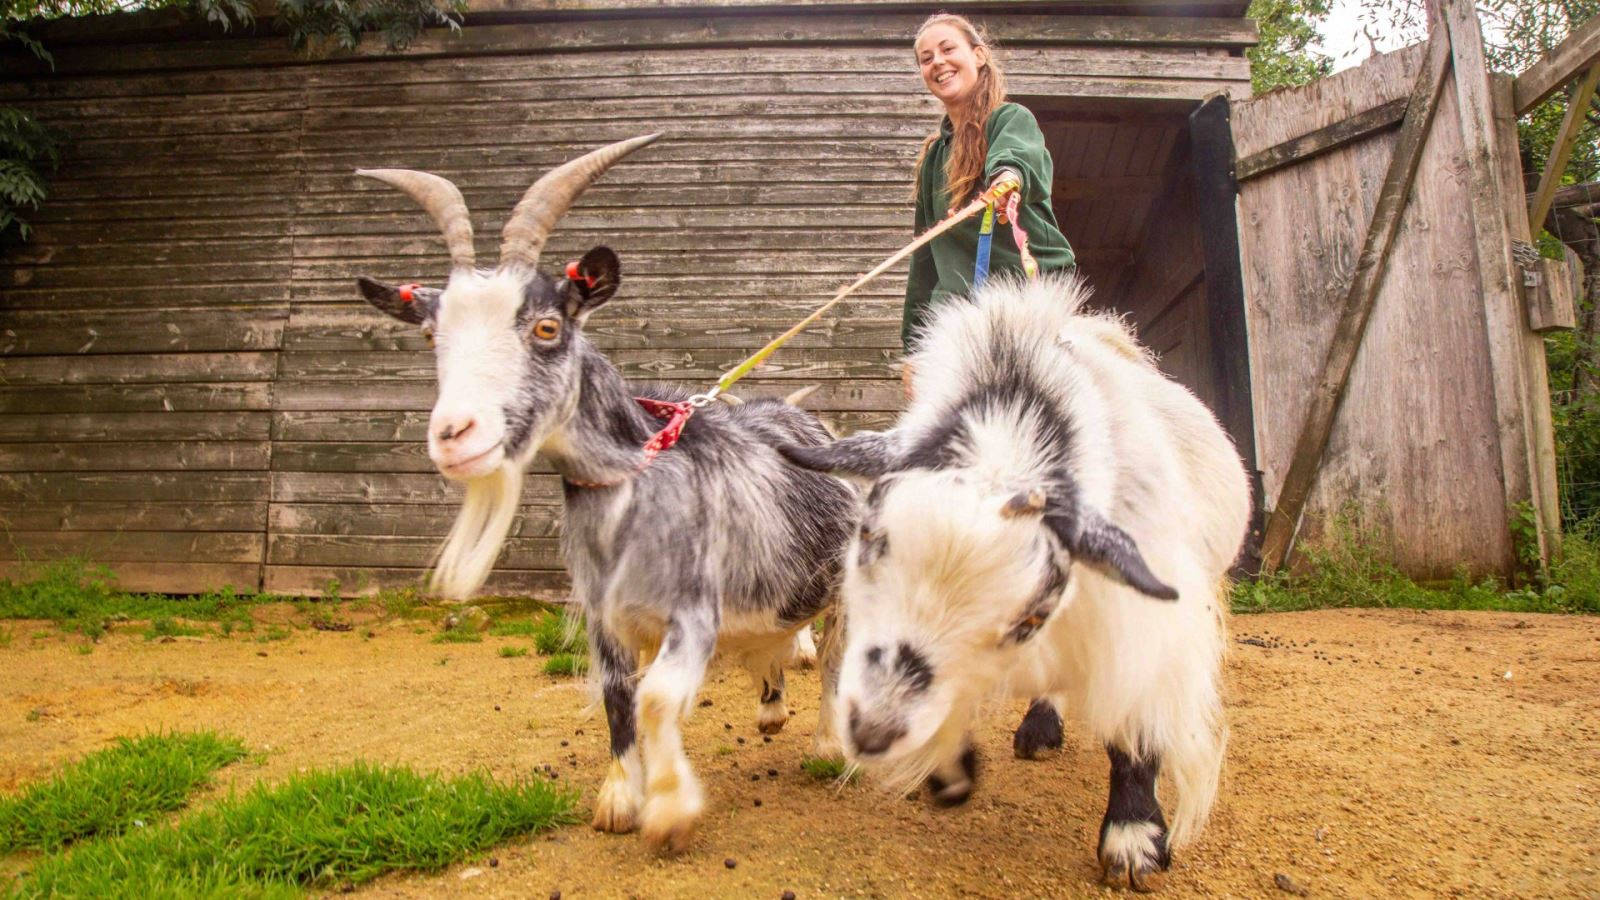 Keeper Jayne with the African Pygmy Goats